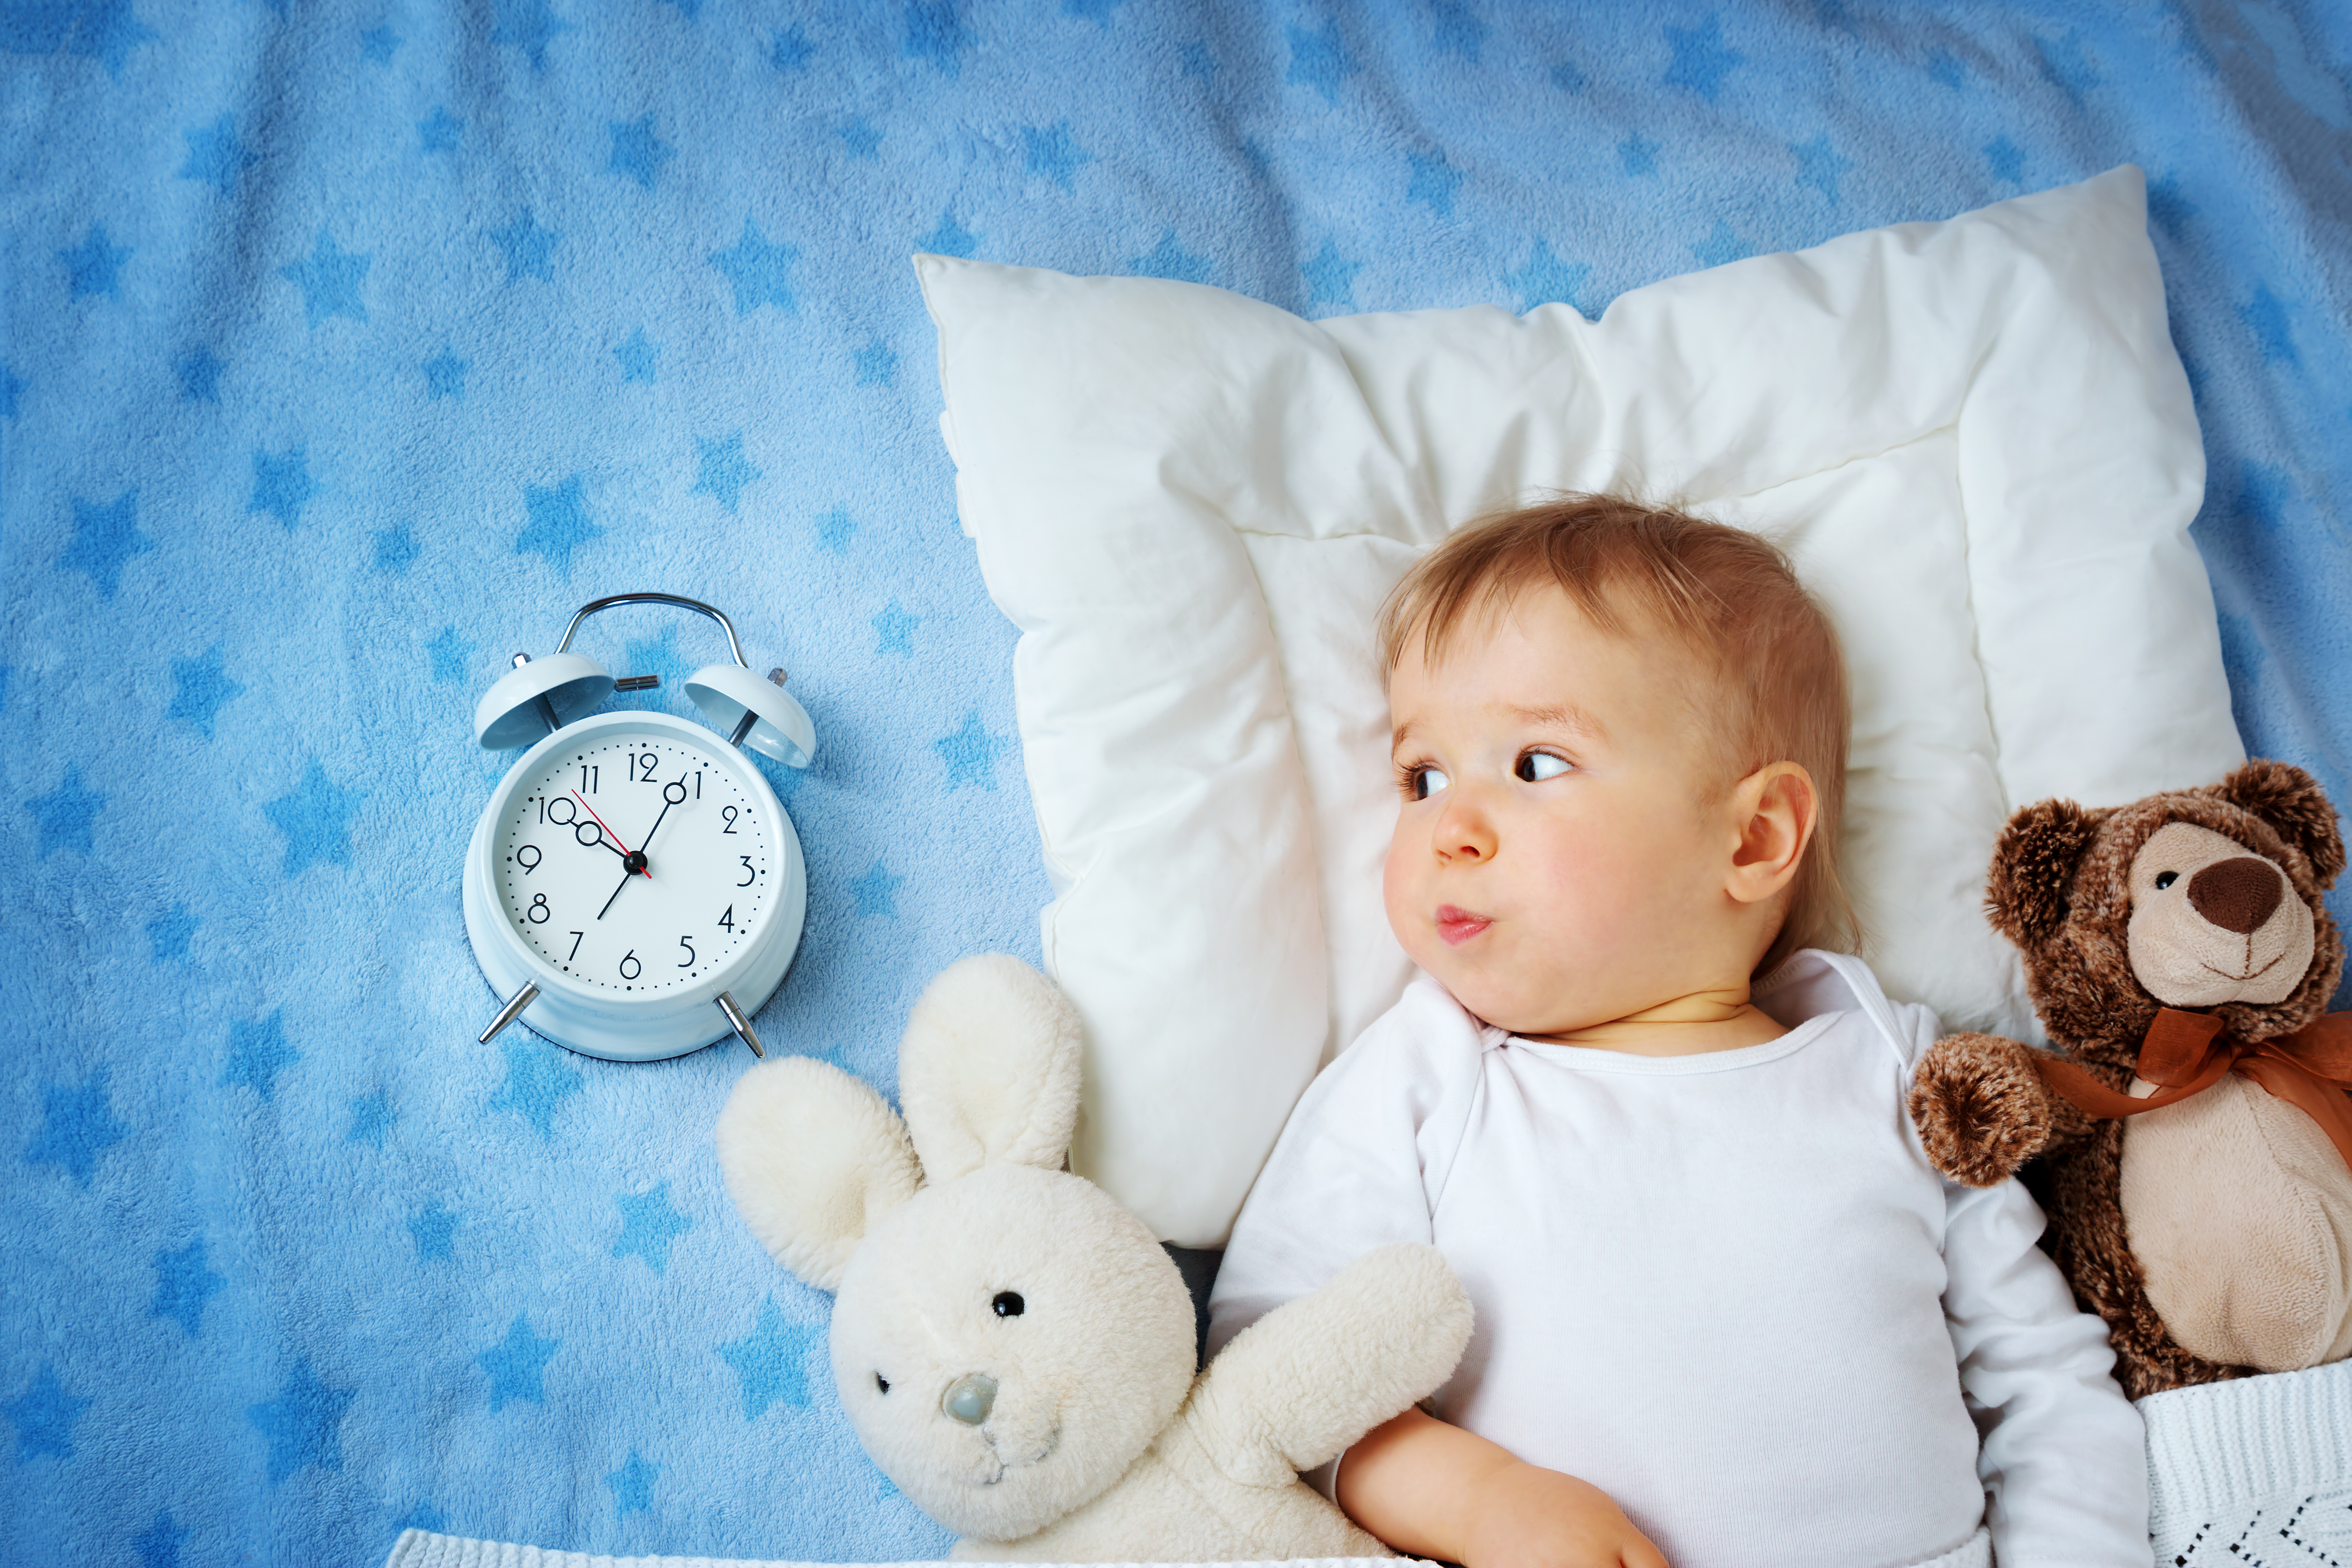 One year old baby lying in bed with alarm clock